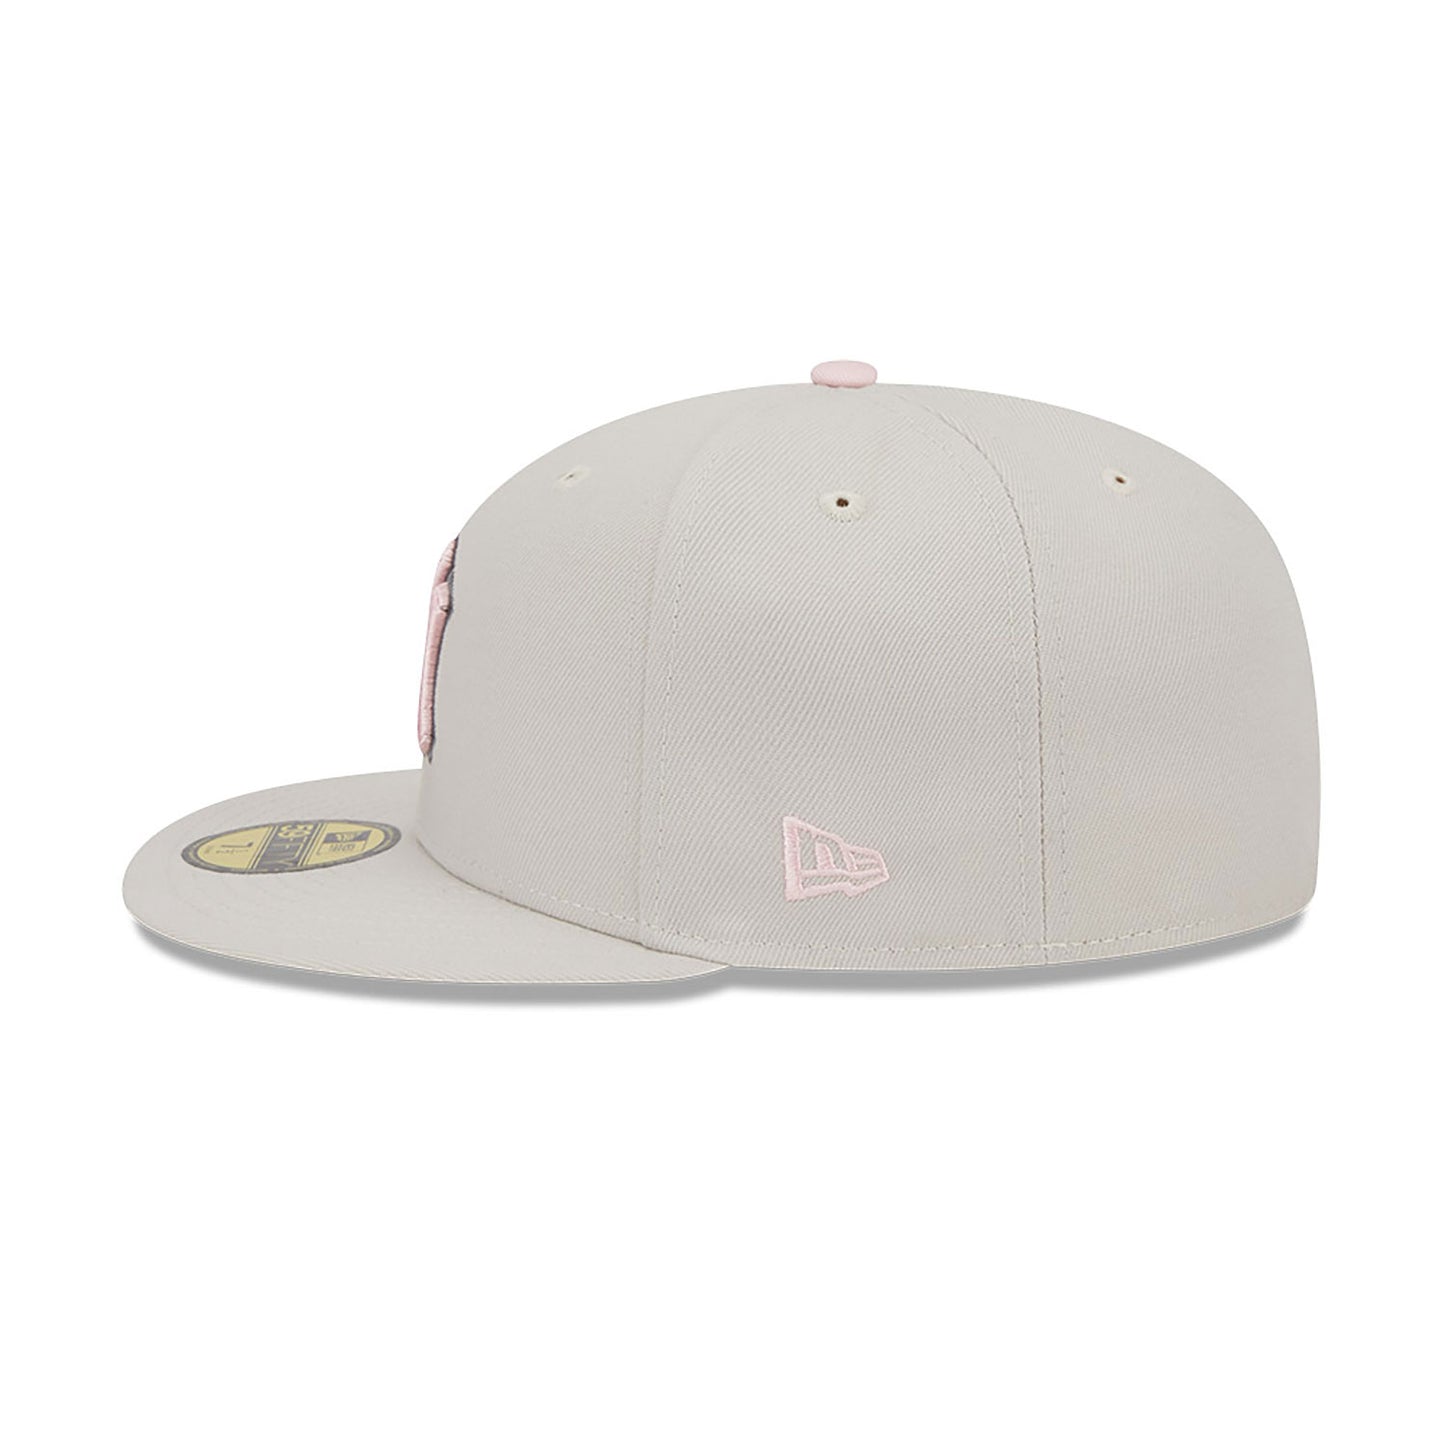 White NYC Fitted Cap sp